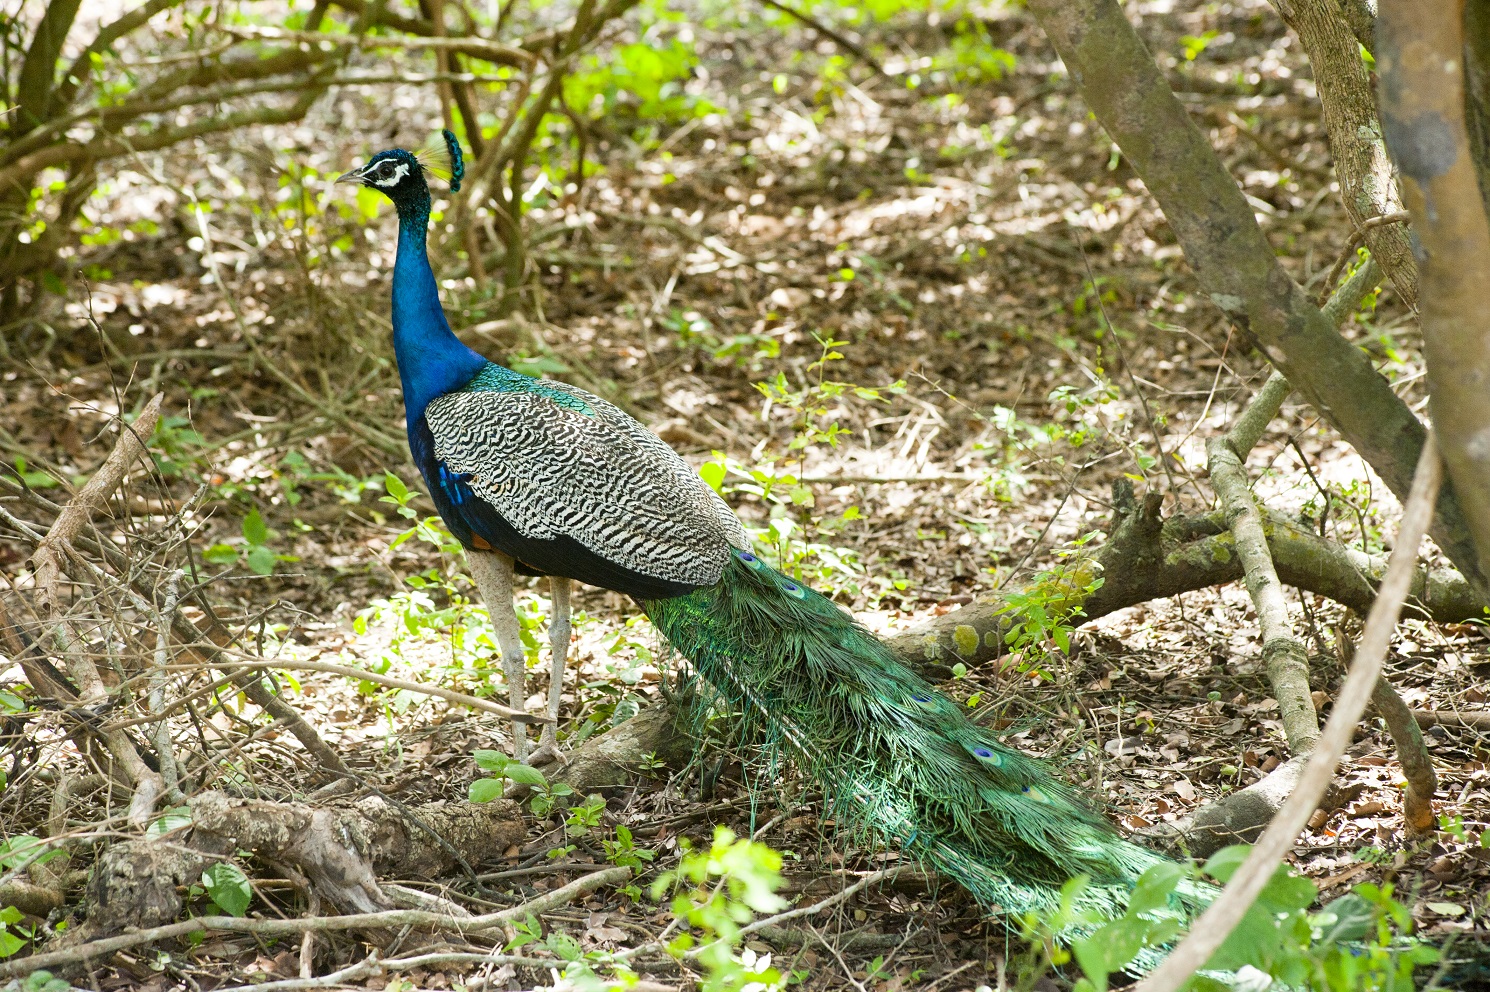 male peacock in forest showing tail